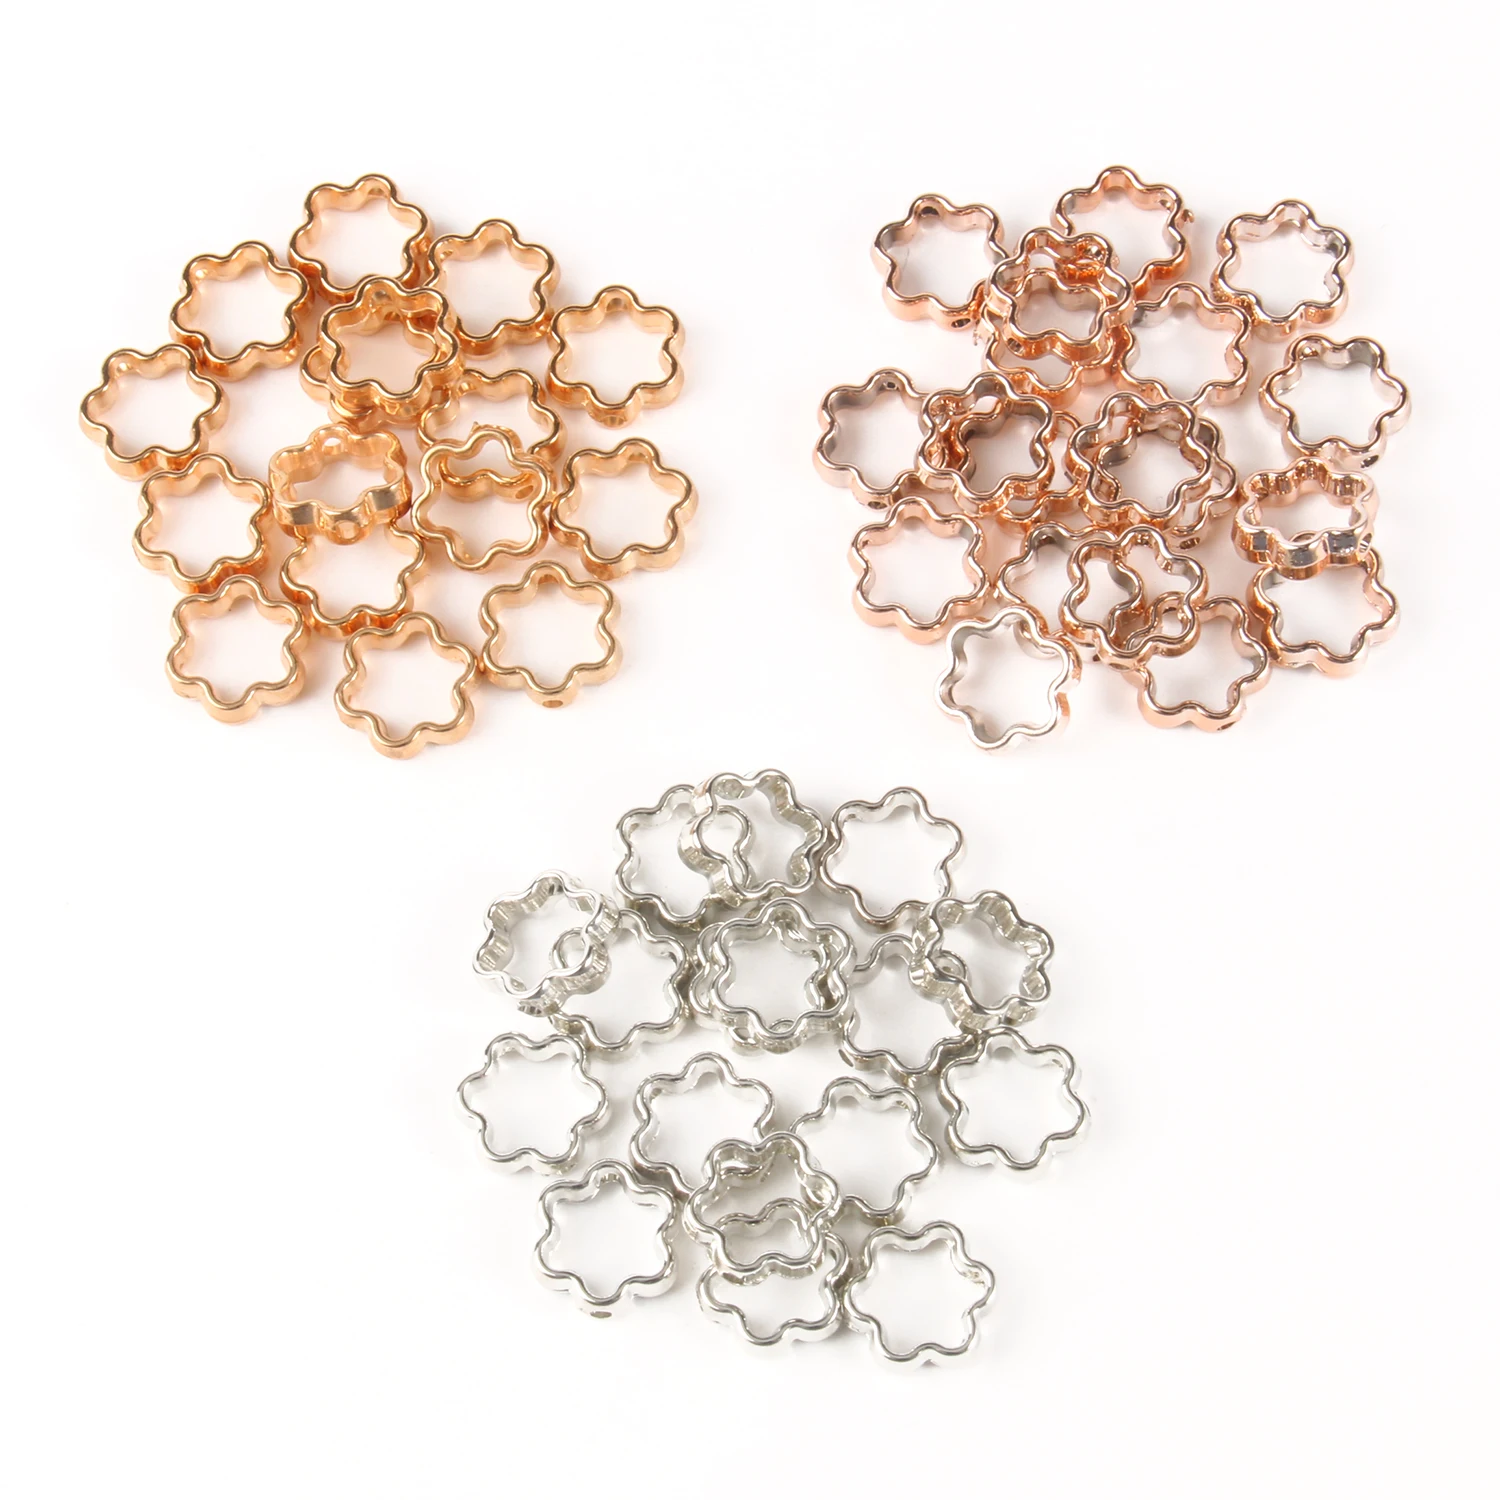 

50pcs 12mm Gold Silver Color Flower Ring Spacer Beads Double Hole Jump Rings CCB For Jewelry Making DIY Earrings Necklaces Tools